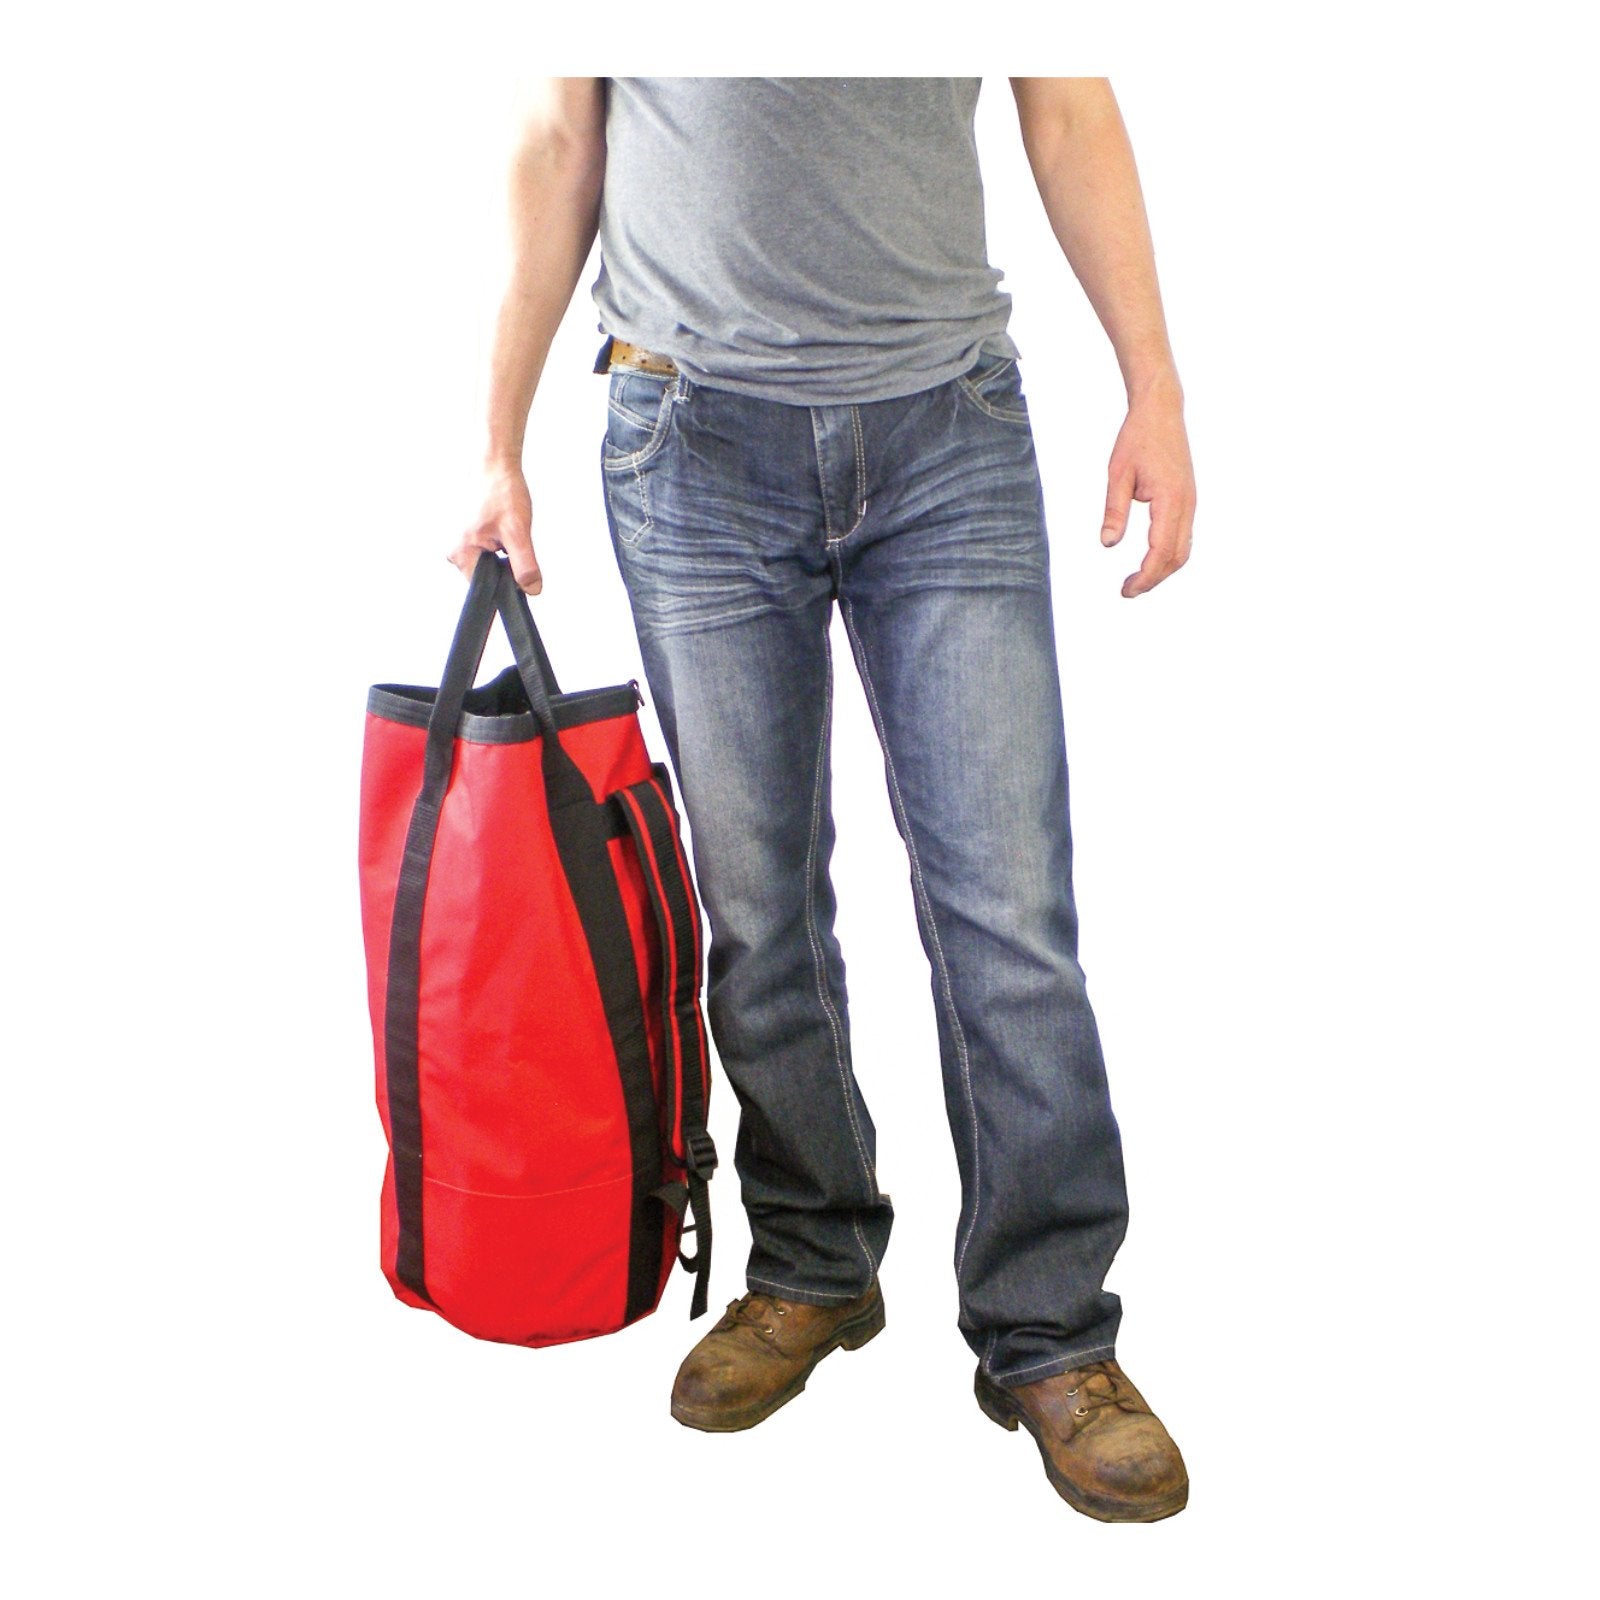 Portable Winch Rope Bag - XLarge